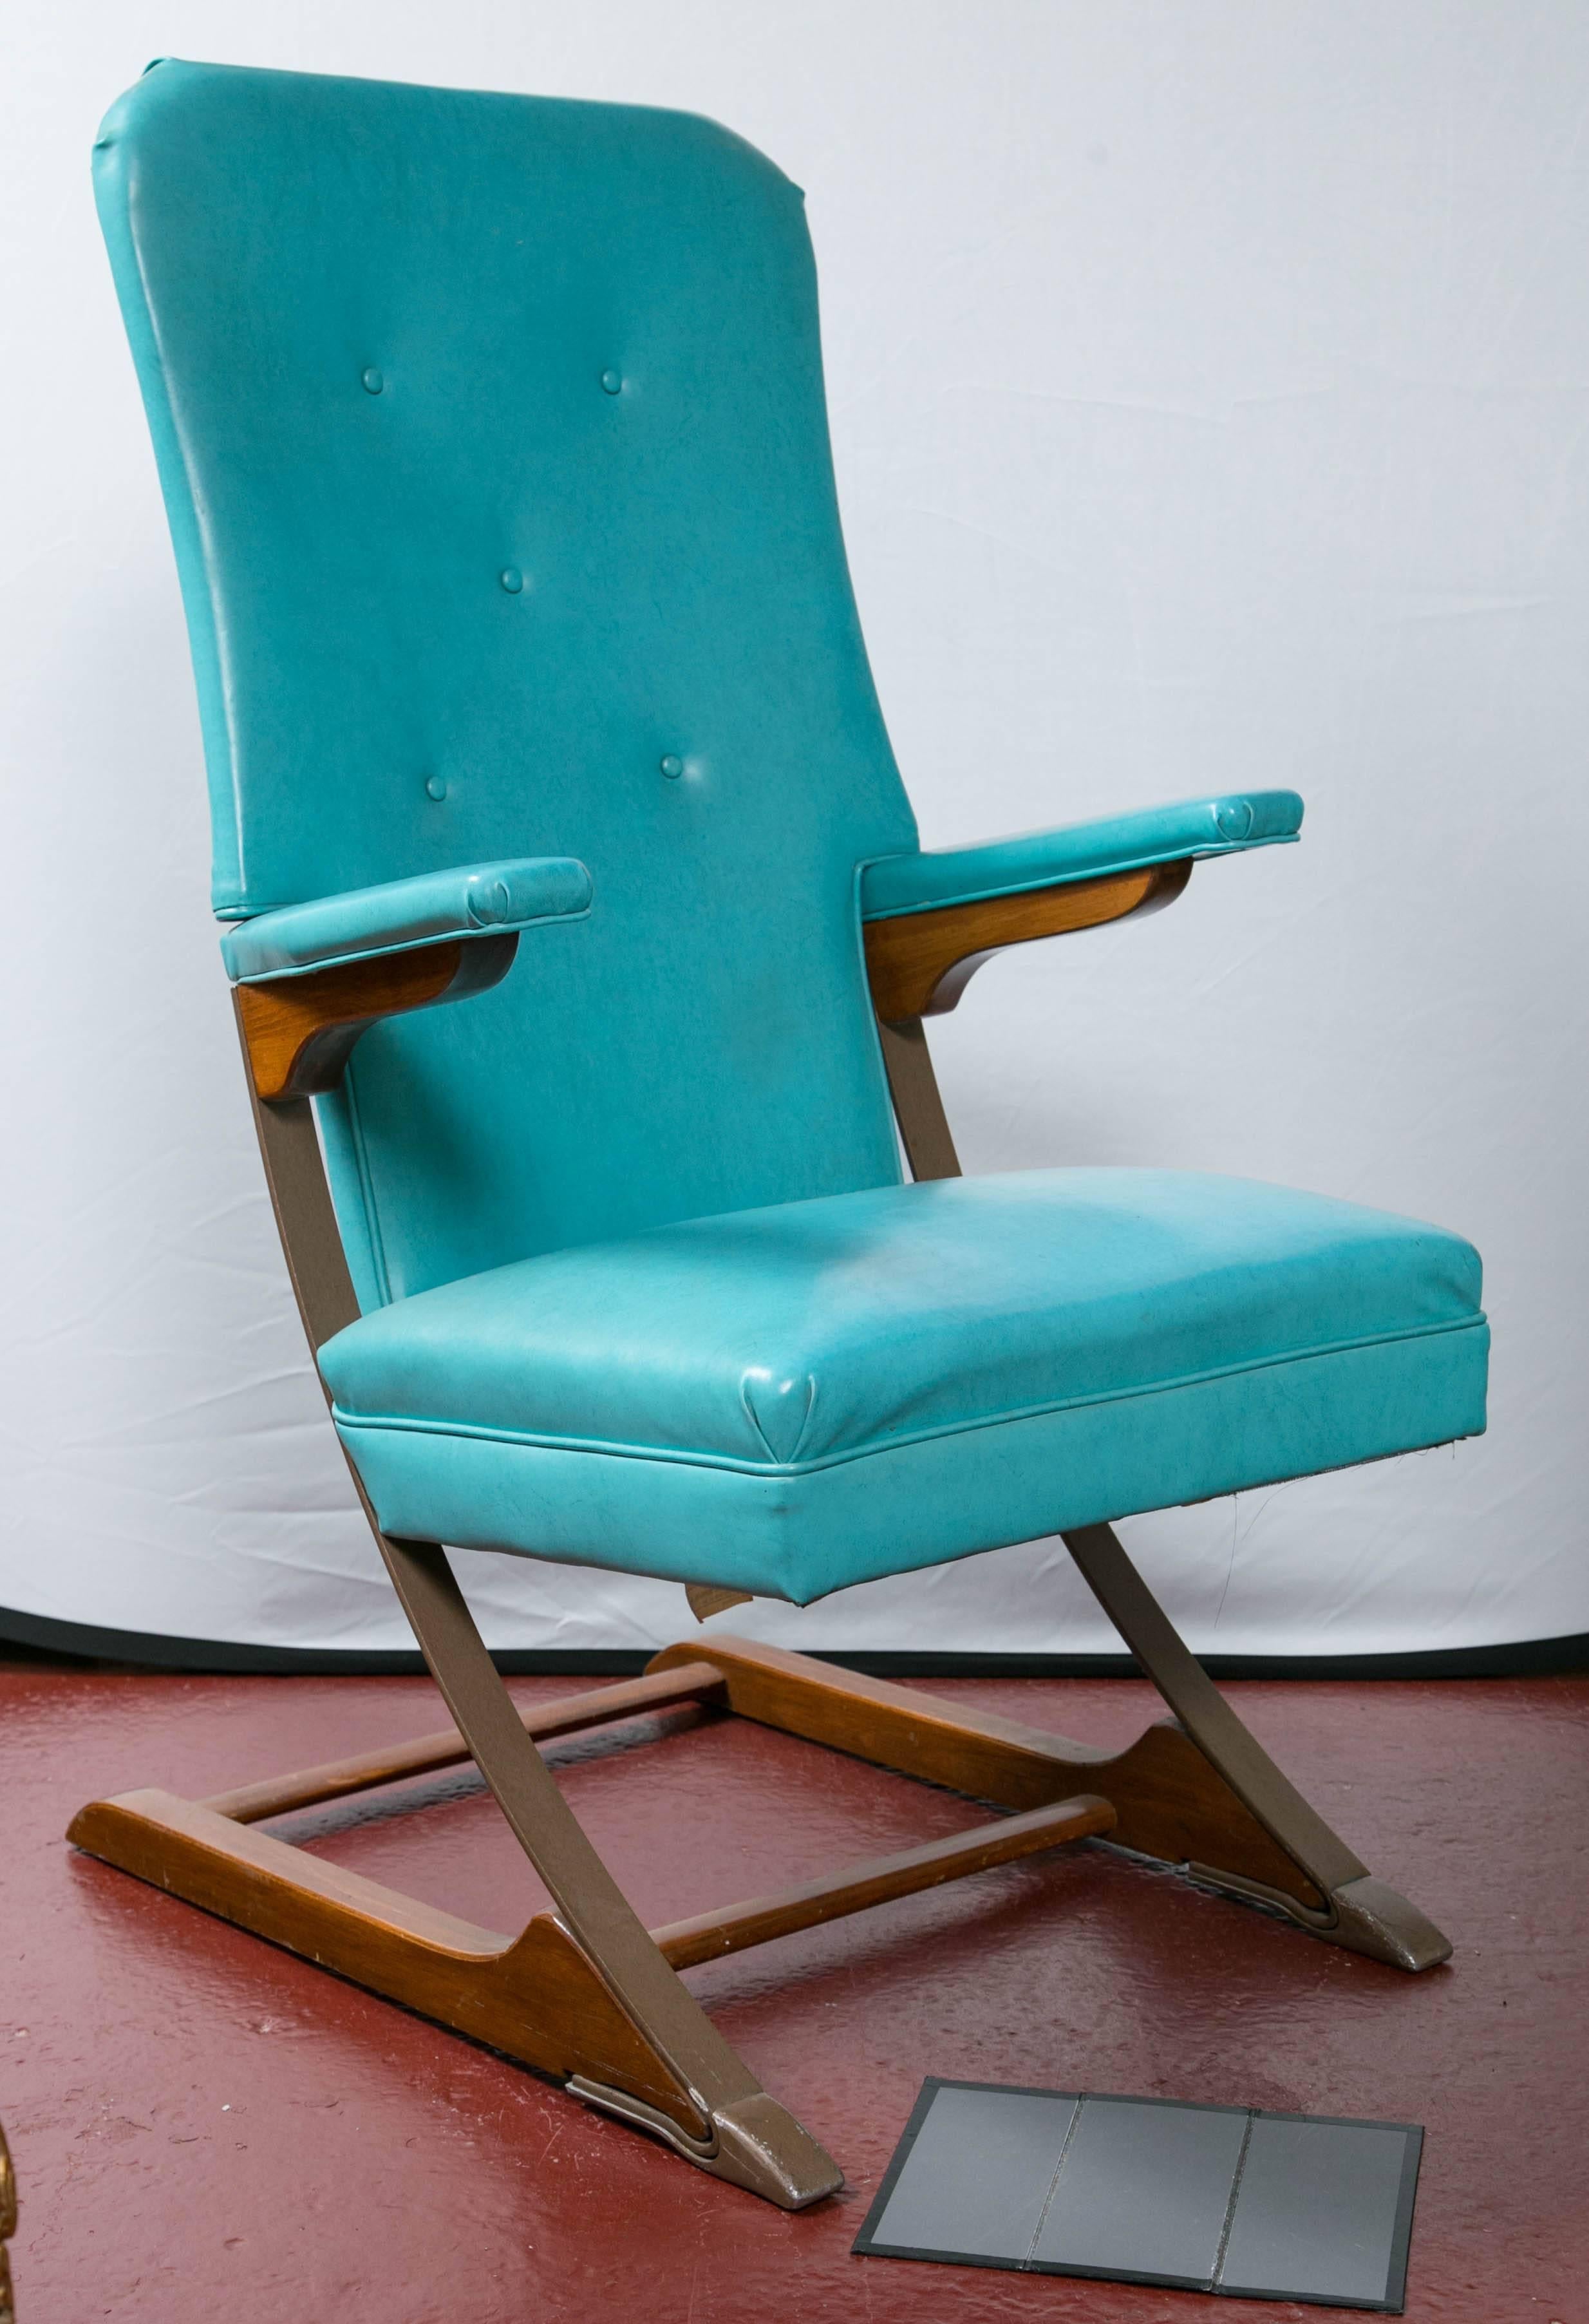 Set of six blue padded dining chairs, can buy one or all. Vintage Mid-Century cantilever rocker by designer McKay. This 1950s, 1960s rocker is a rare and wonderful piece! The frame is a combination of steel and wood and the rocking motion is just